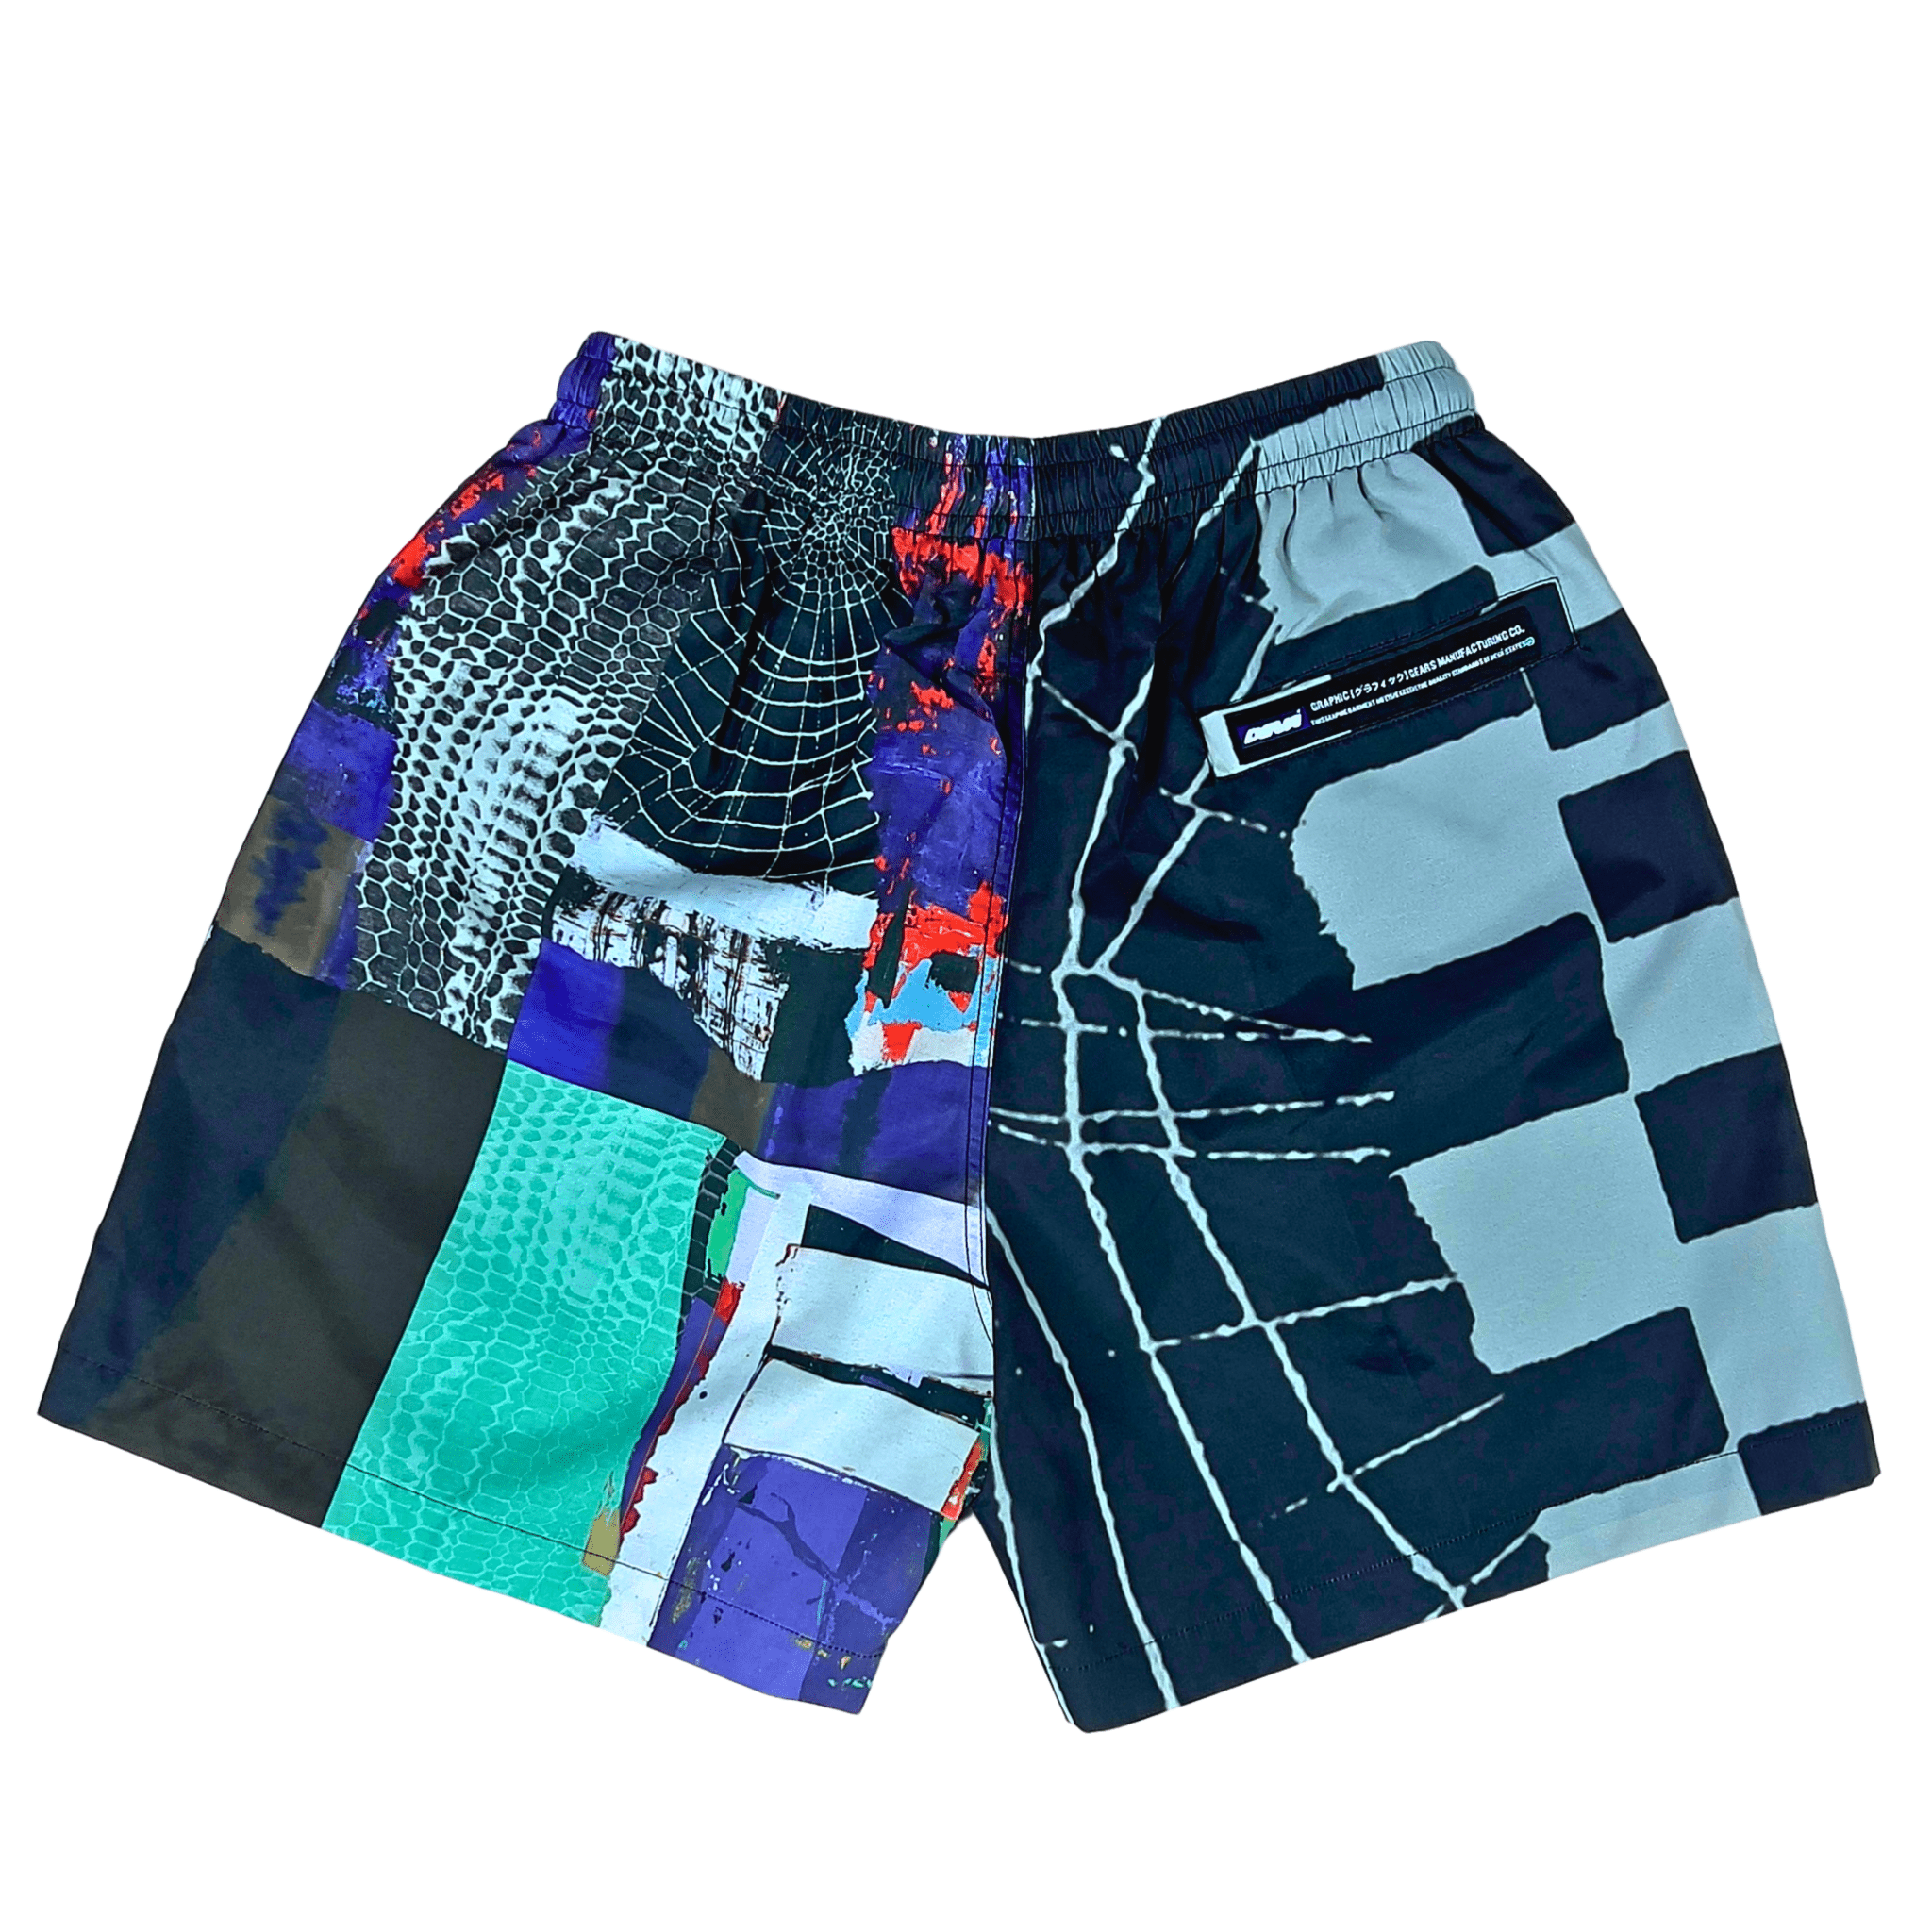 Particula Printed Nylon Shorts in multi